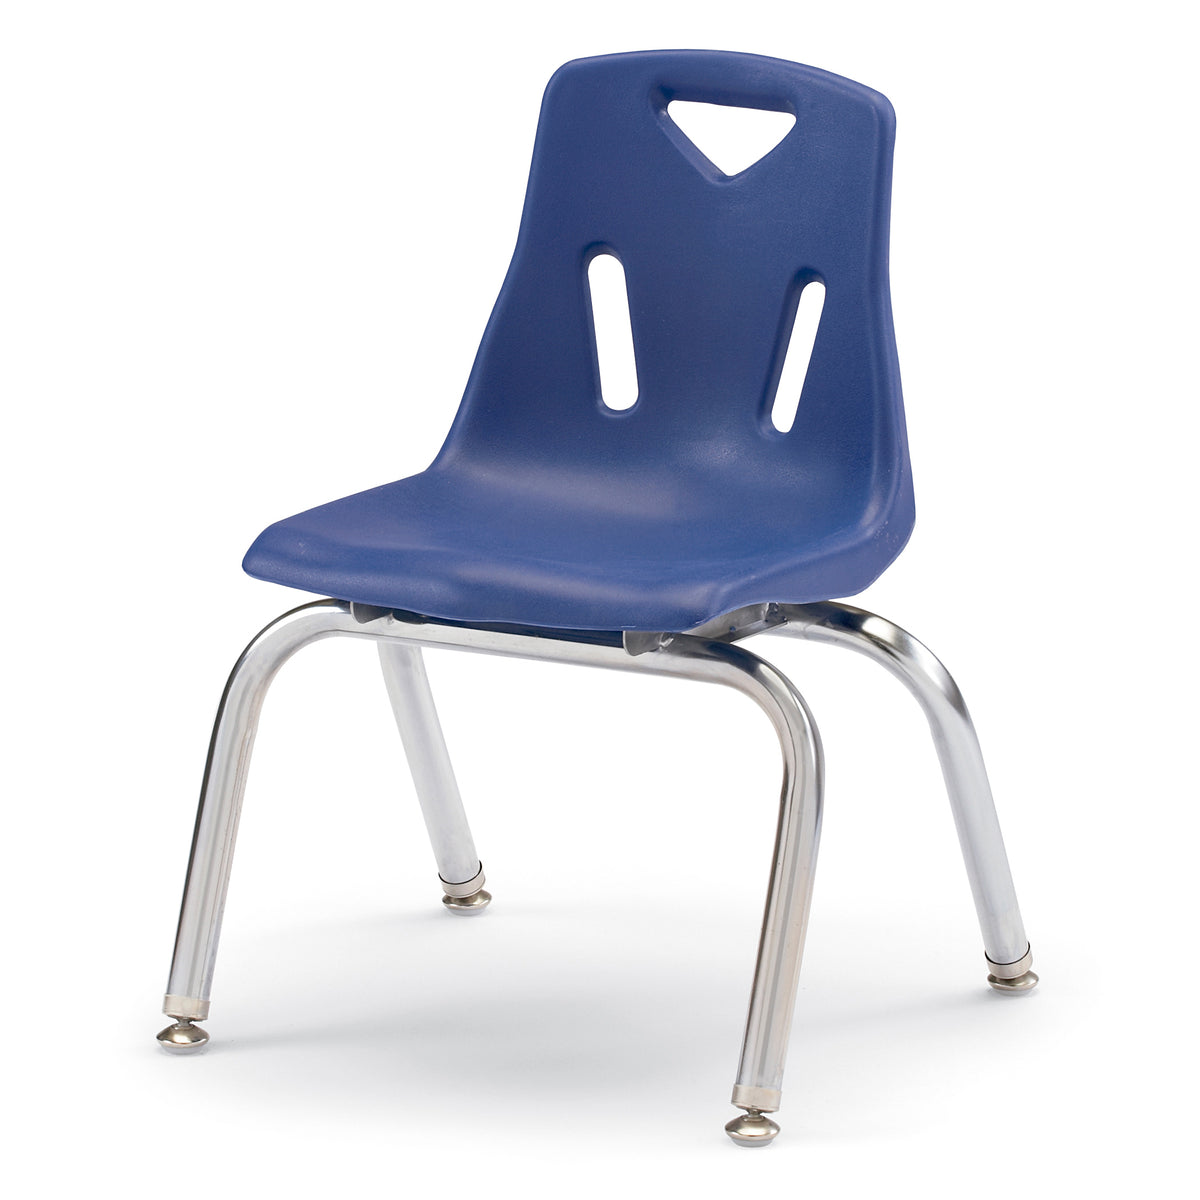 8142JC1003, Berries Stacking Chair with Chrome-Plated Legs - 12" Ht - Blue